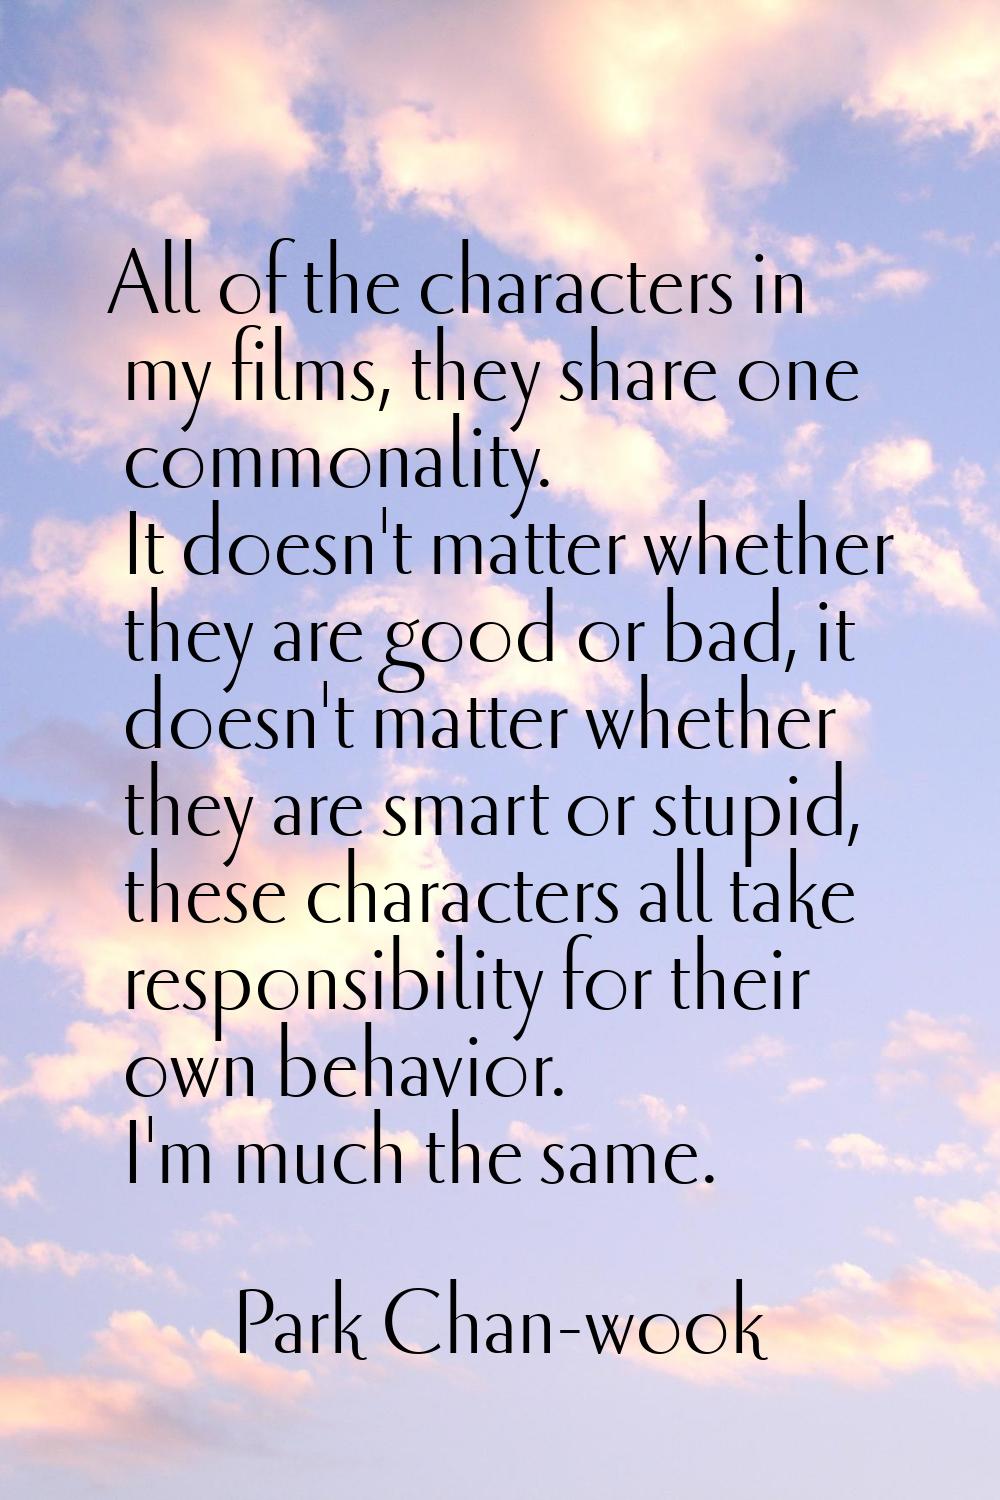 All of the characters in my films, they share one commonality. It doesn't matter whether they are g